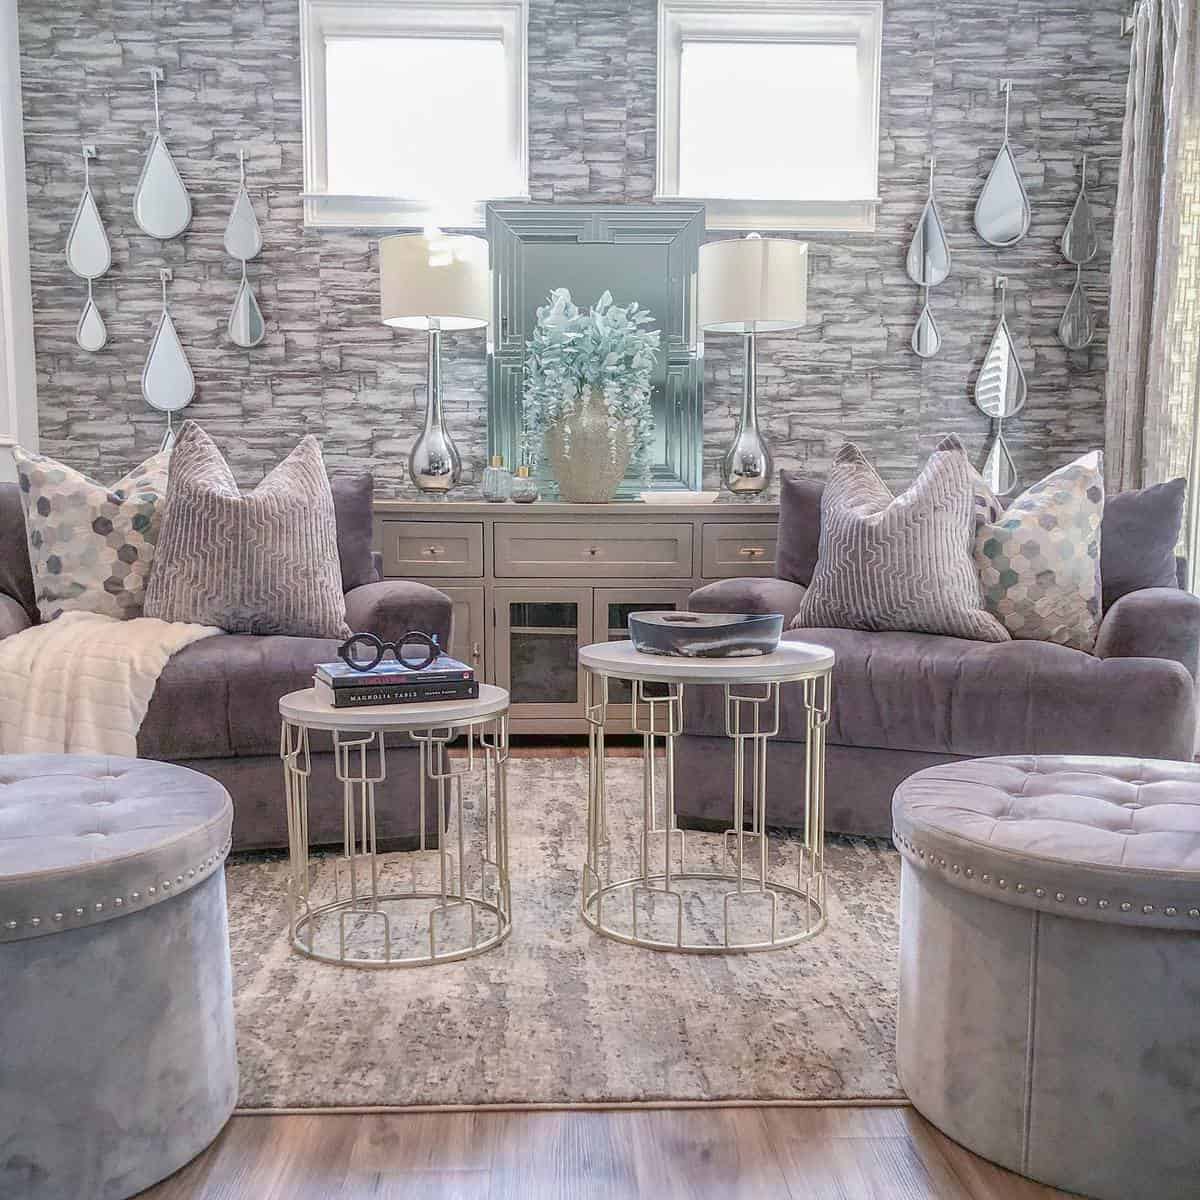 Gray country style sofa